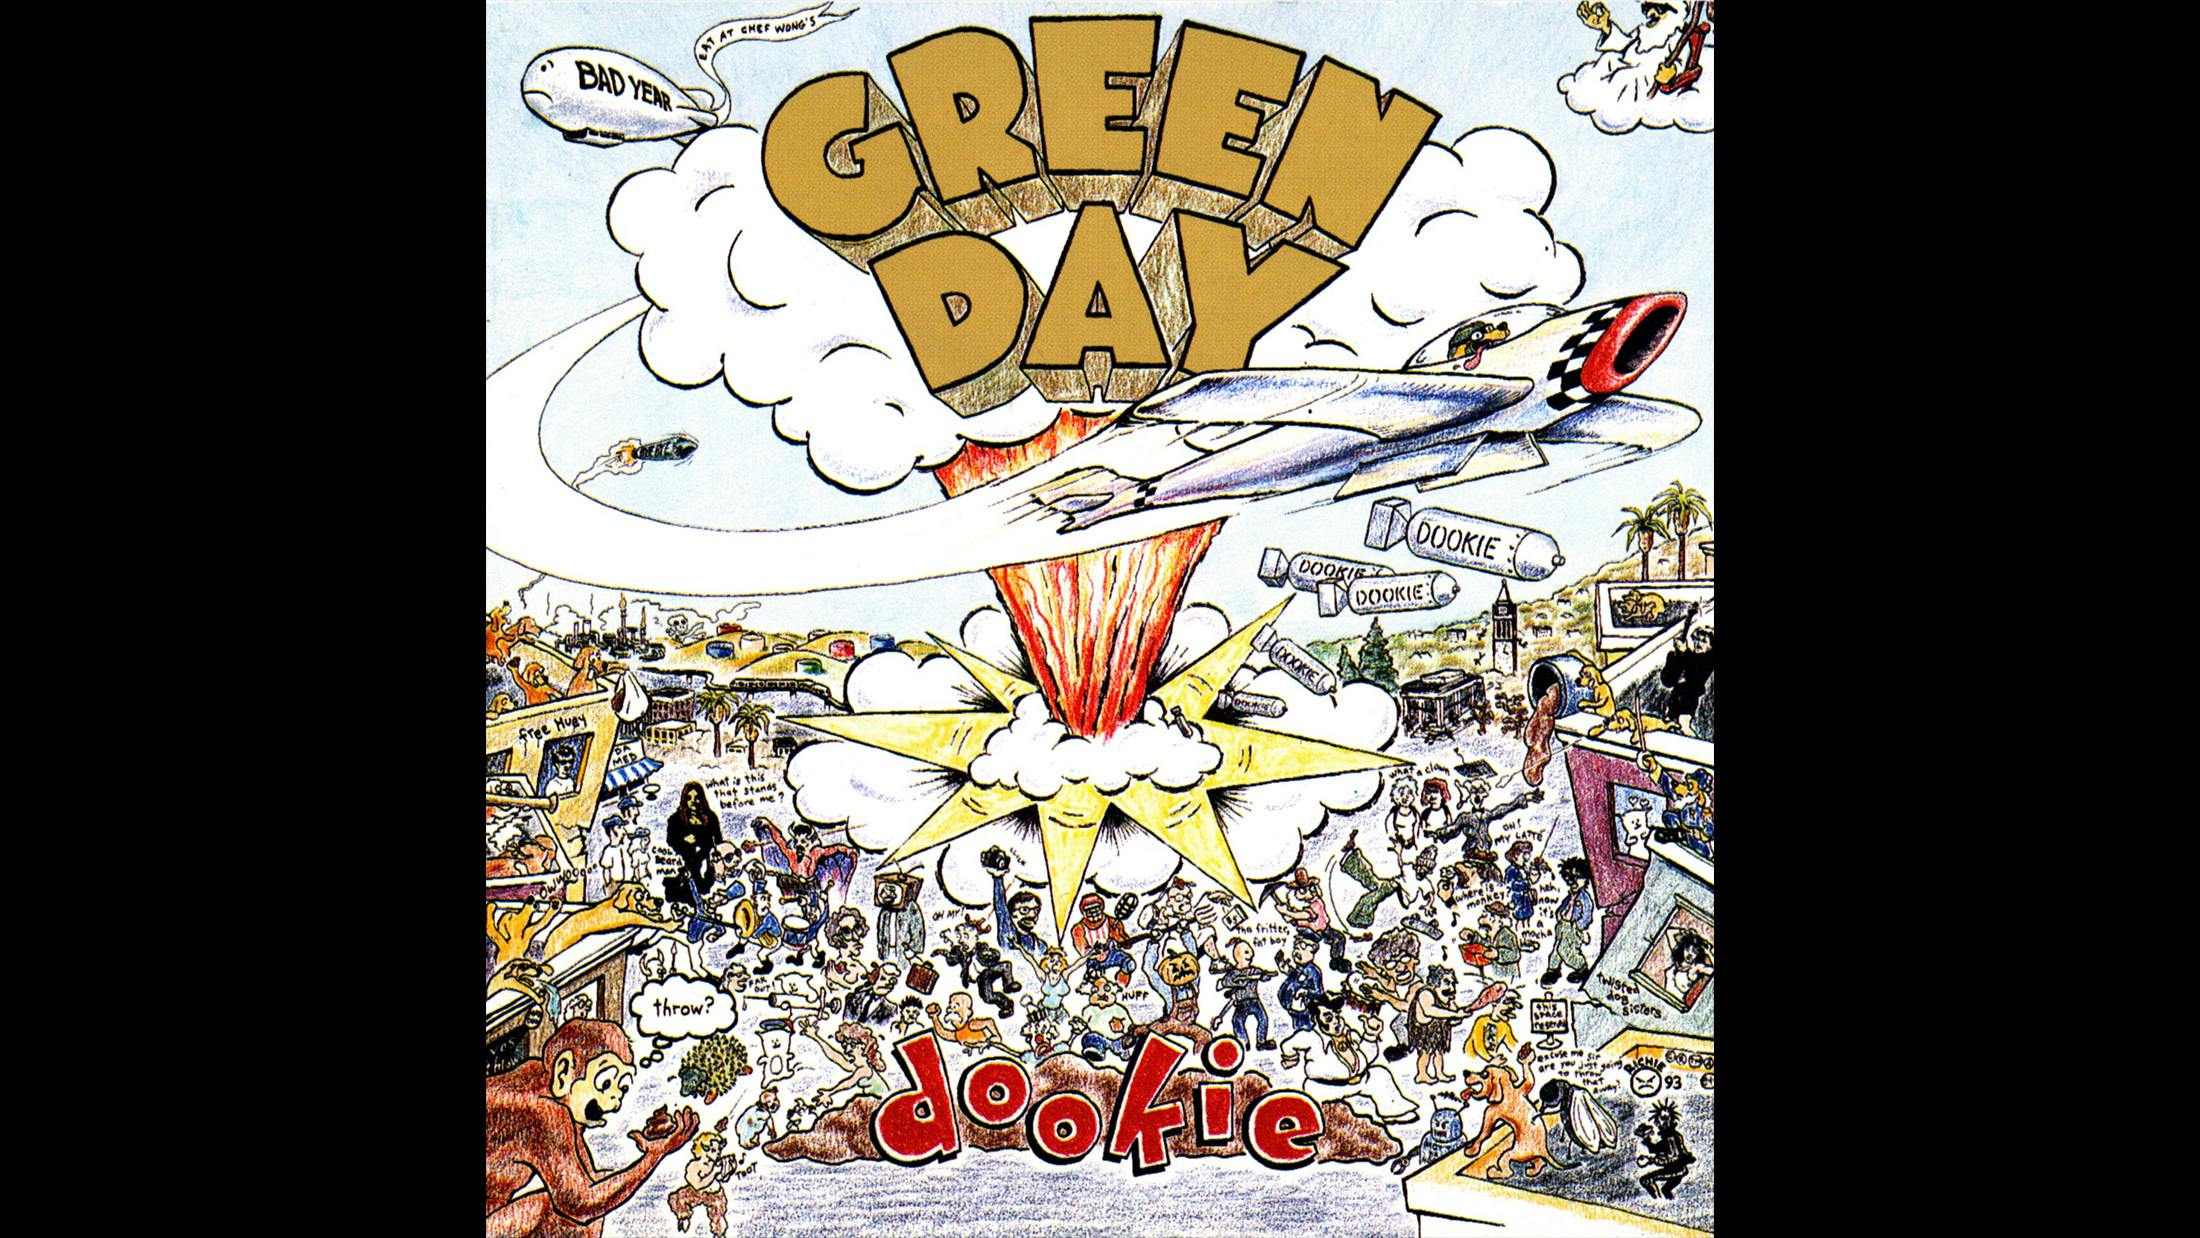 Nobody foresaw the Dookie hitting the fan. Yeah, Green Day’s third album was coming out on major label Warner Bros, rather than independent punk operation Lookout!. But nobody expected these skinny punks to actually do anything. Yet armed with one of the biggest rock songs of the ’90s (Basket Case), a track about wanking (Longview) and enough raw, snotty simplicity to enrapture a world still shaking from the grunge explosion, they went on to sell 16 million copies of this pop-punk staple, making three dorks one of the most important bands ever.